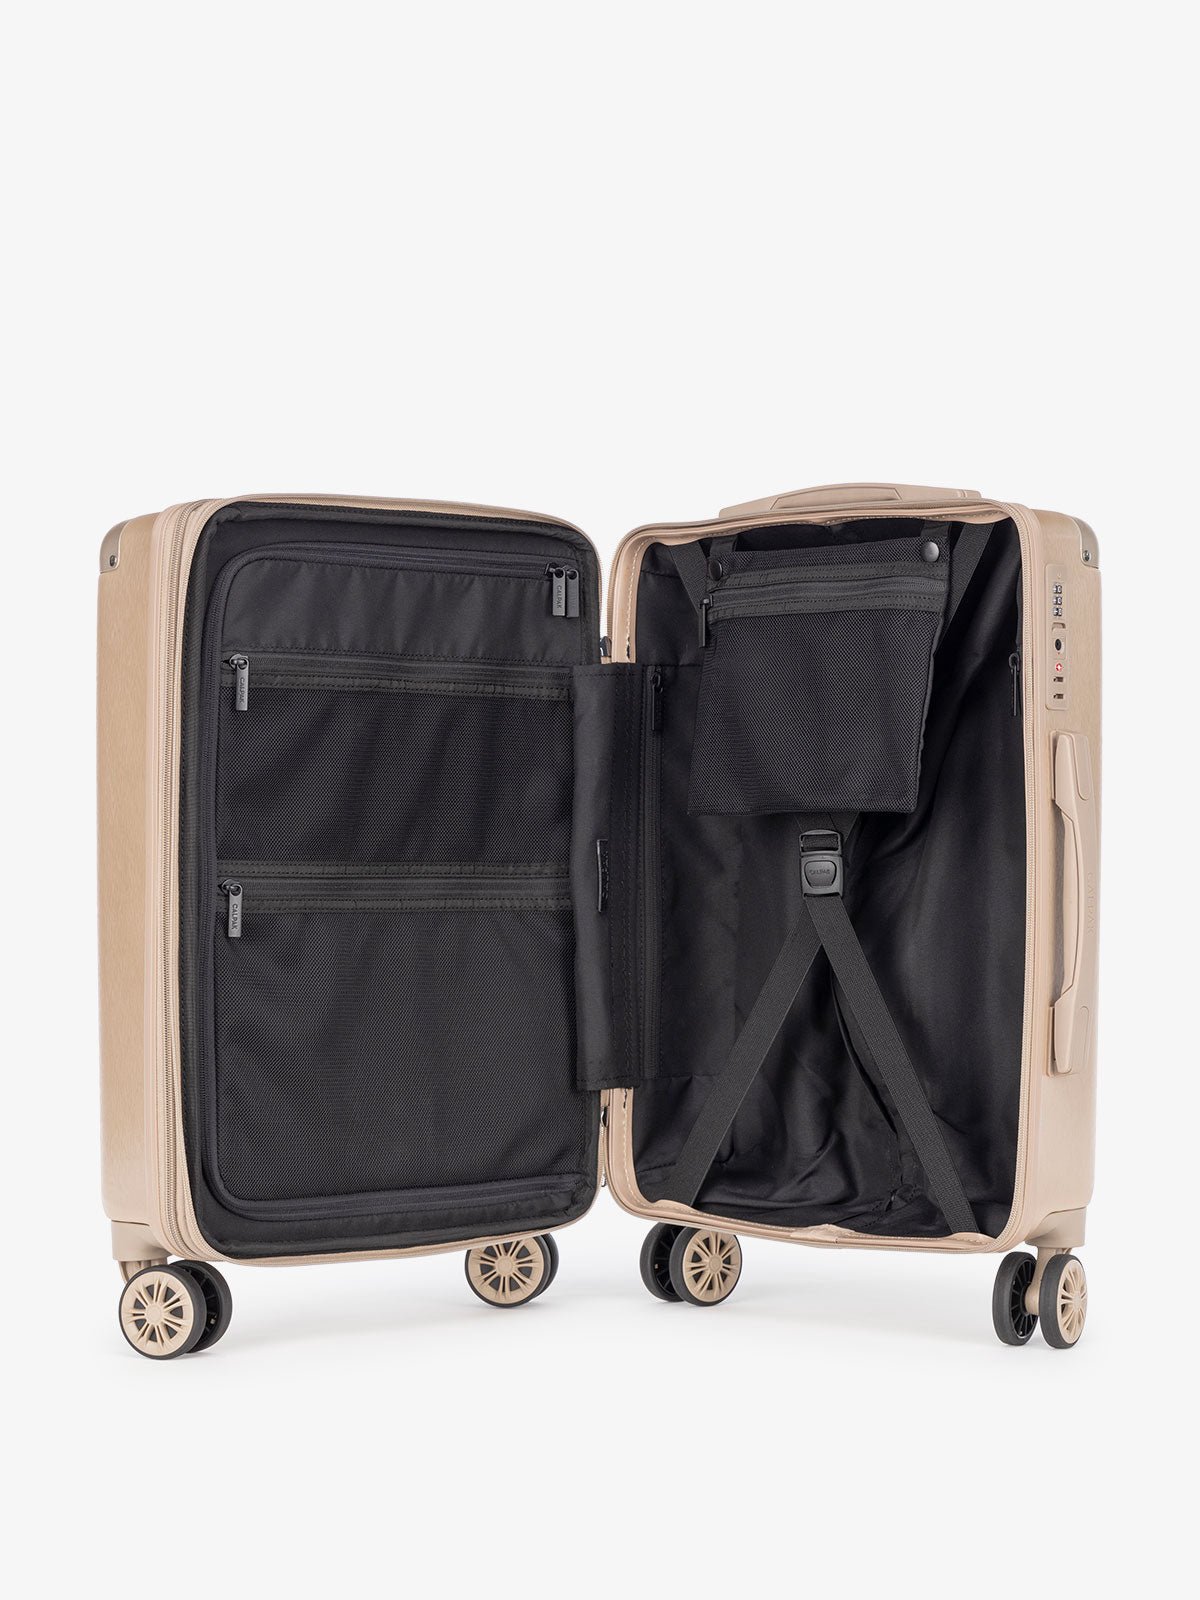 CALPAK Ambeur: 2 piece luggage set with compression straps and zipper pockets